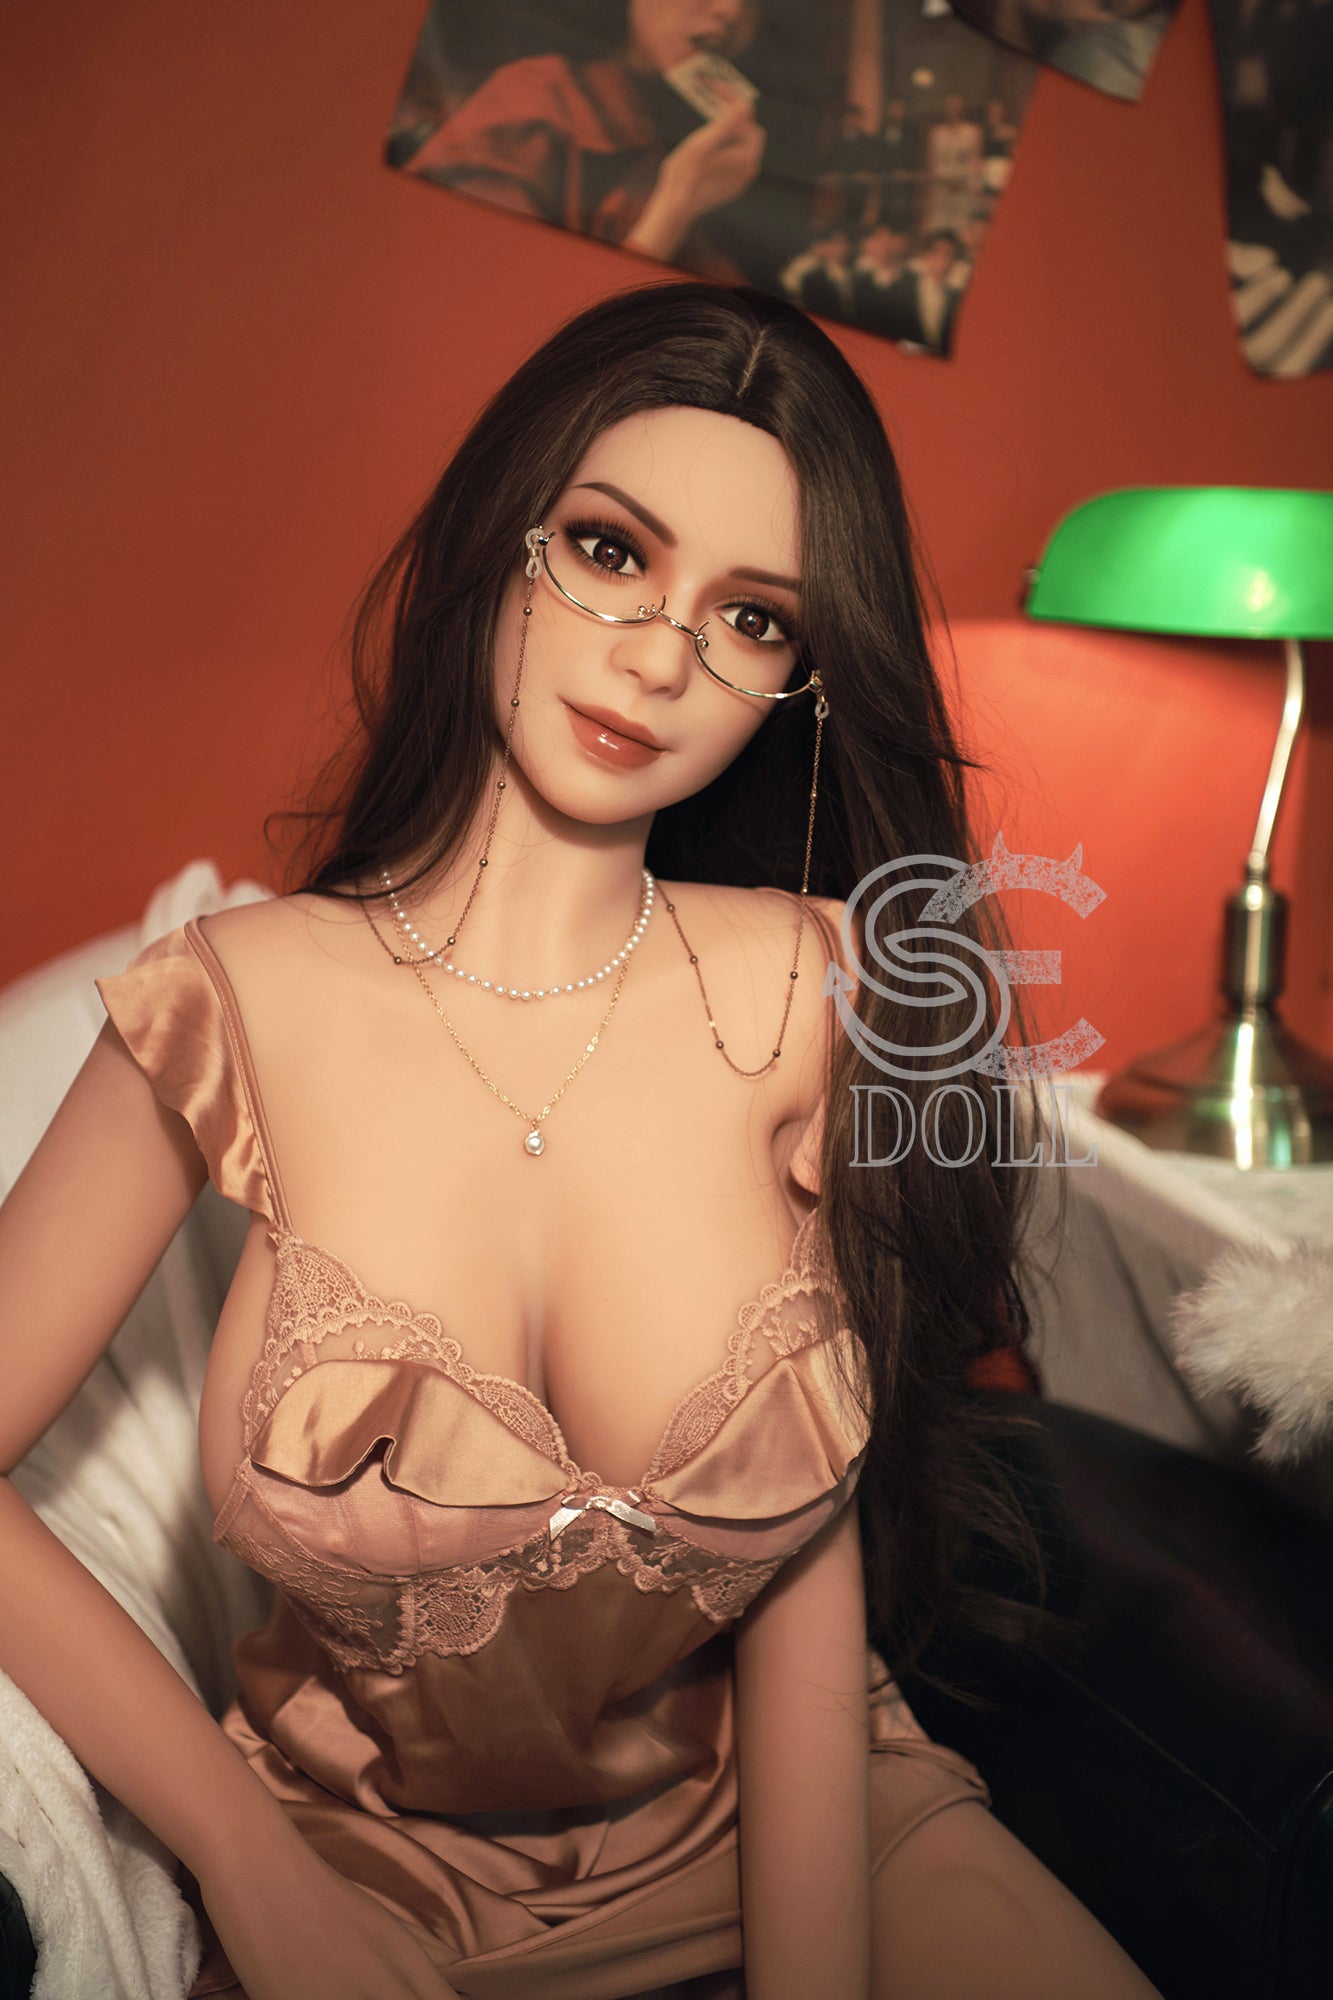 SEDOLL 157 cm H TPE - Camille | Buy Sex Dolls at DOLLS ACTUALLY